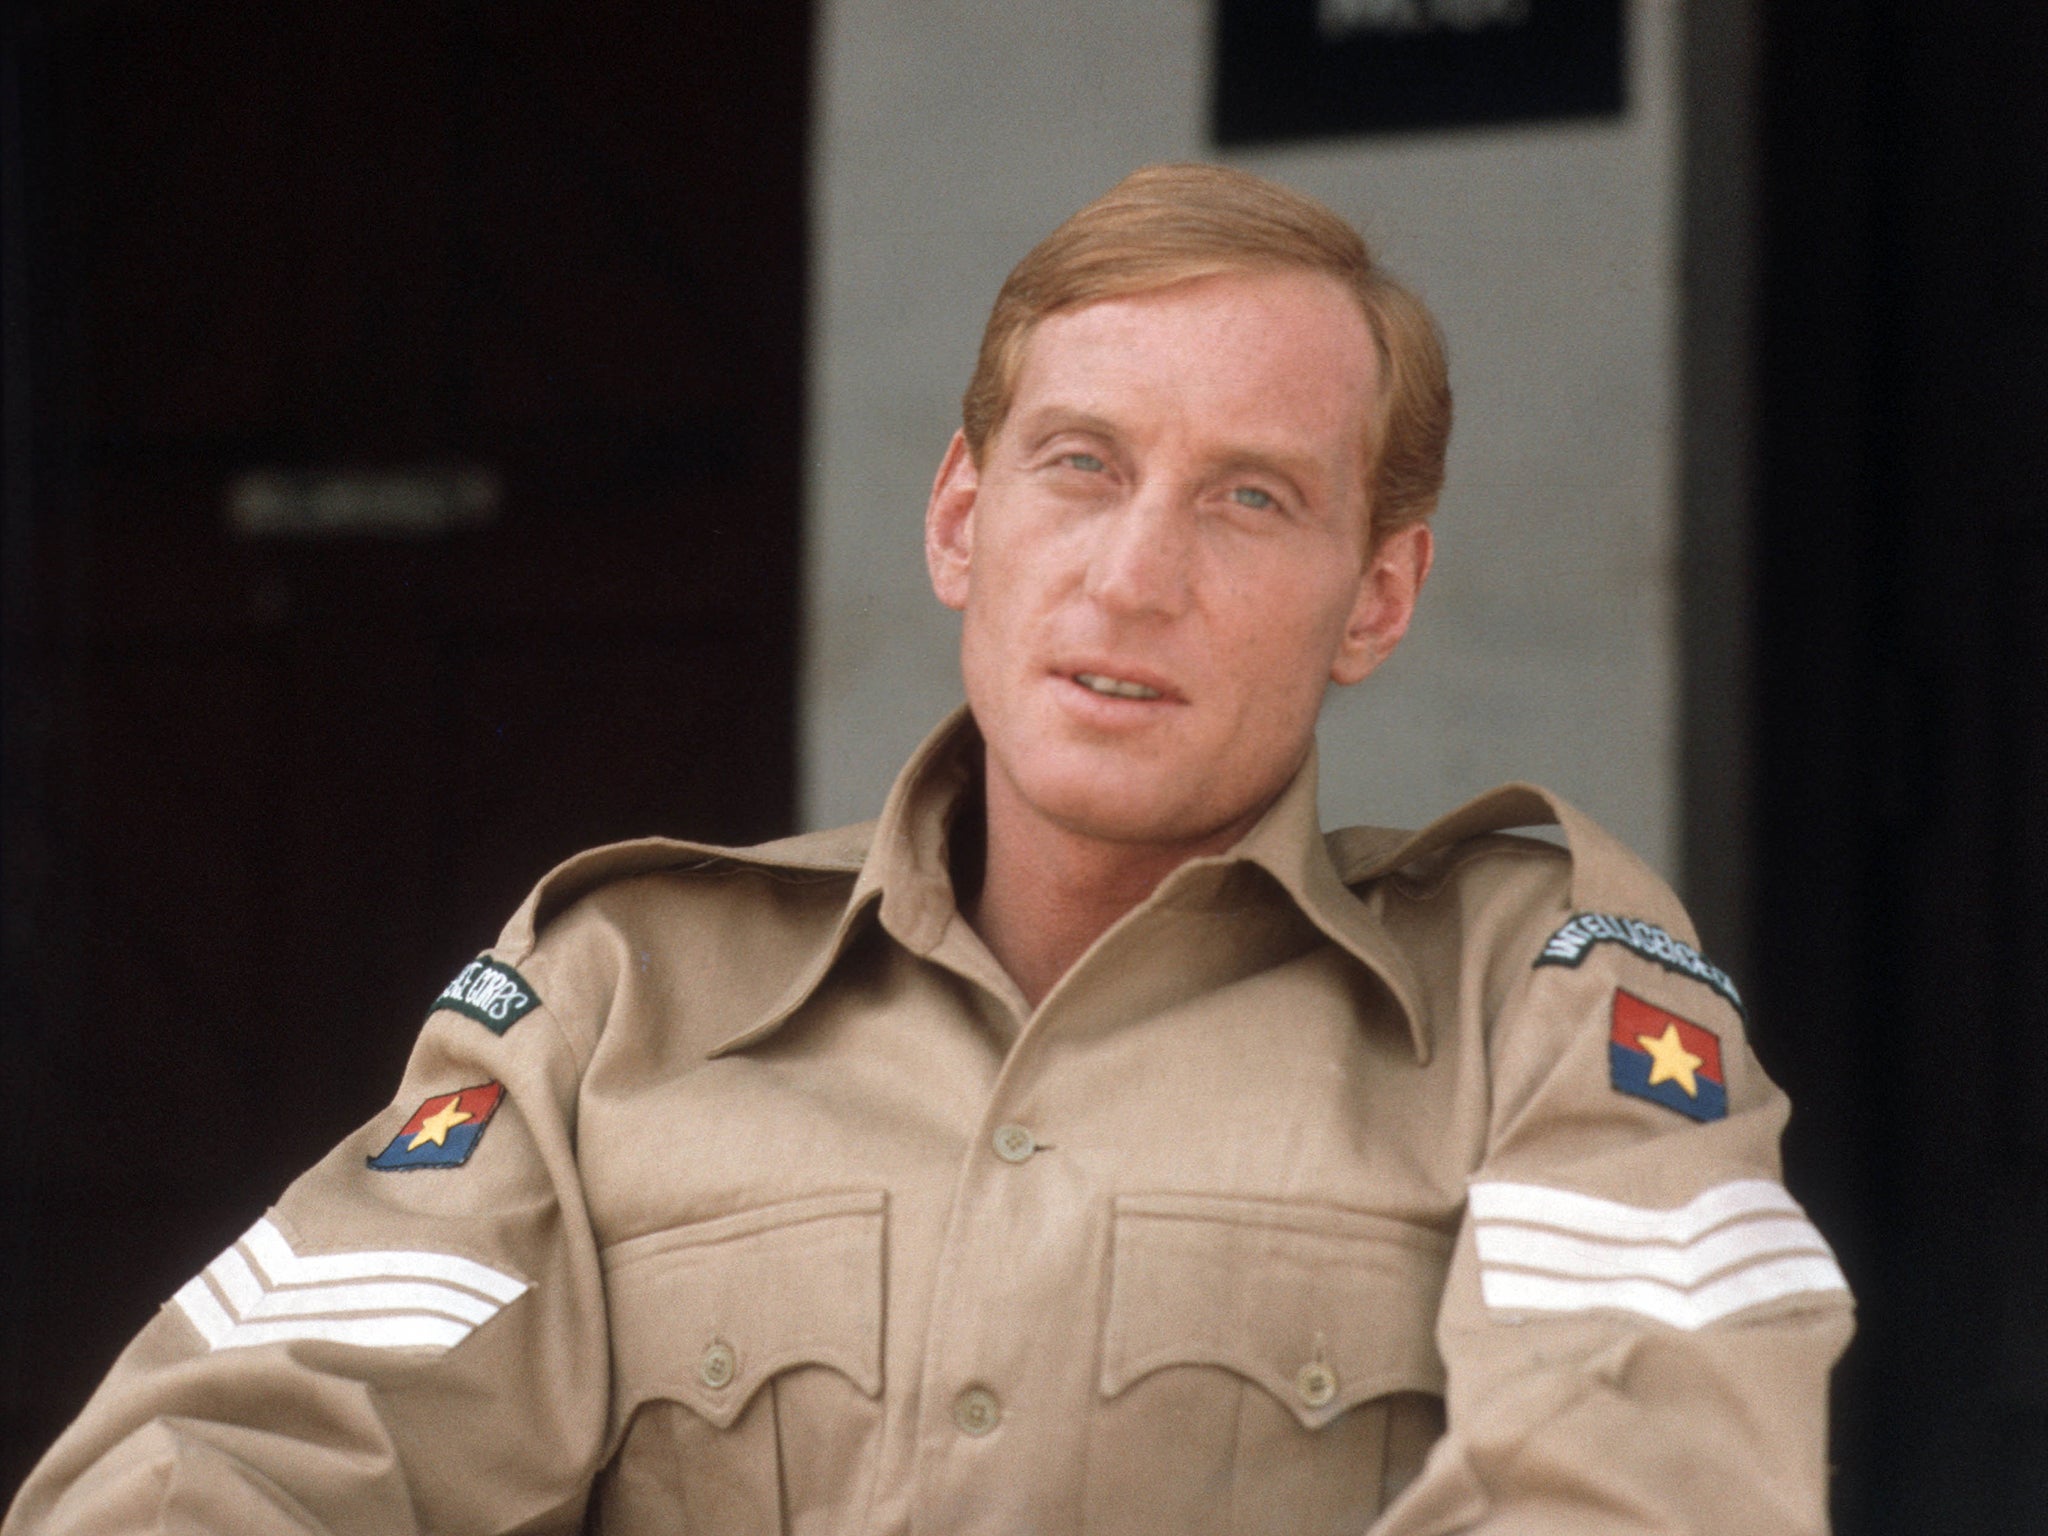 Dance played the role of Sergeant Guy Perron in ITV’s 1984 colonial drama The Jewel in the Crown